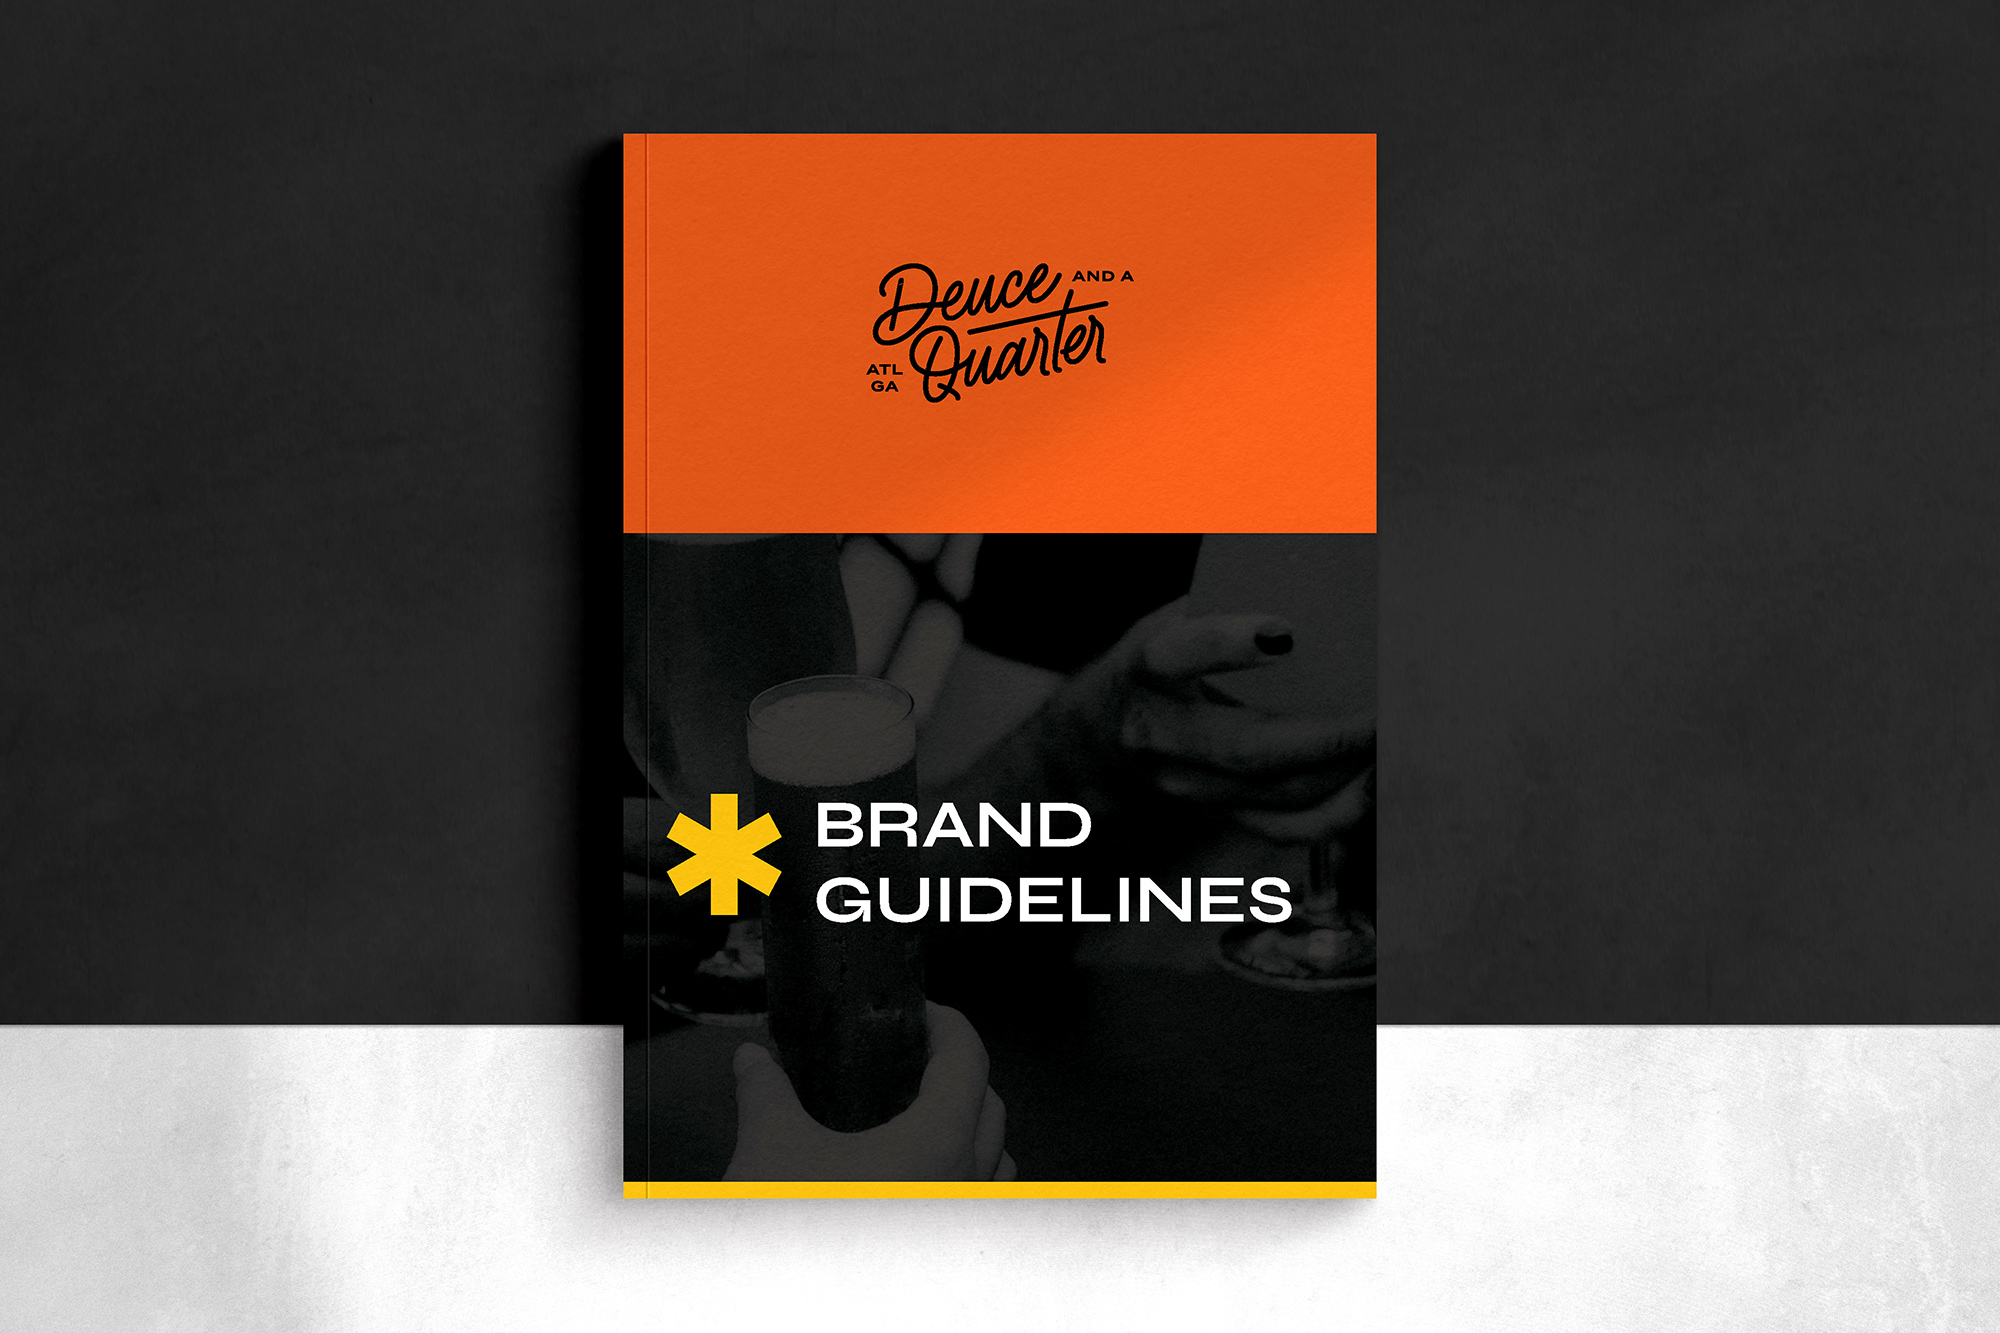 deuce and a quarter brand guidelines